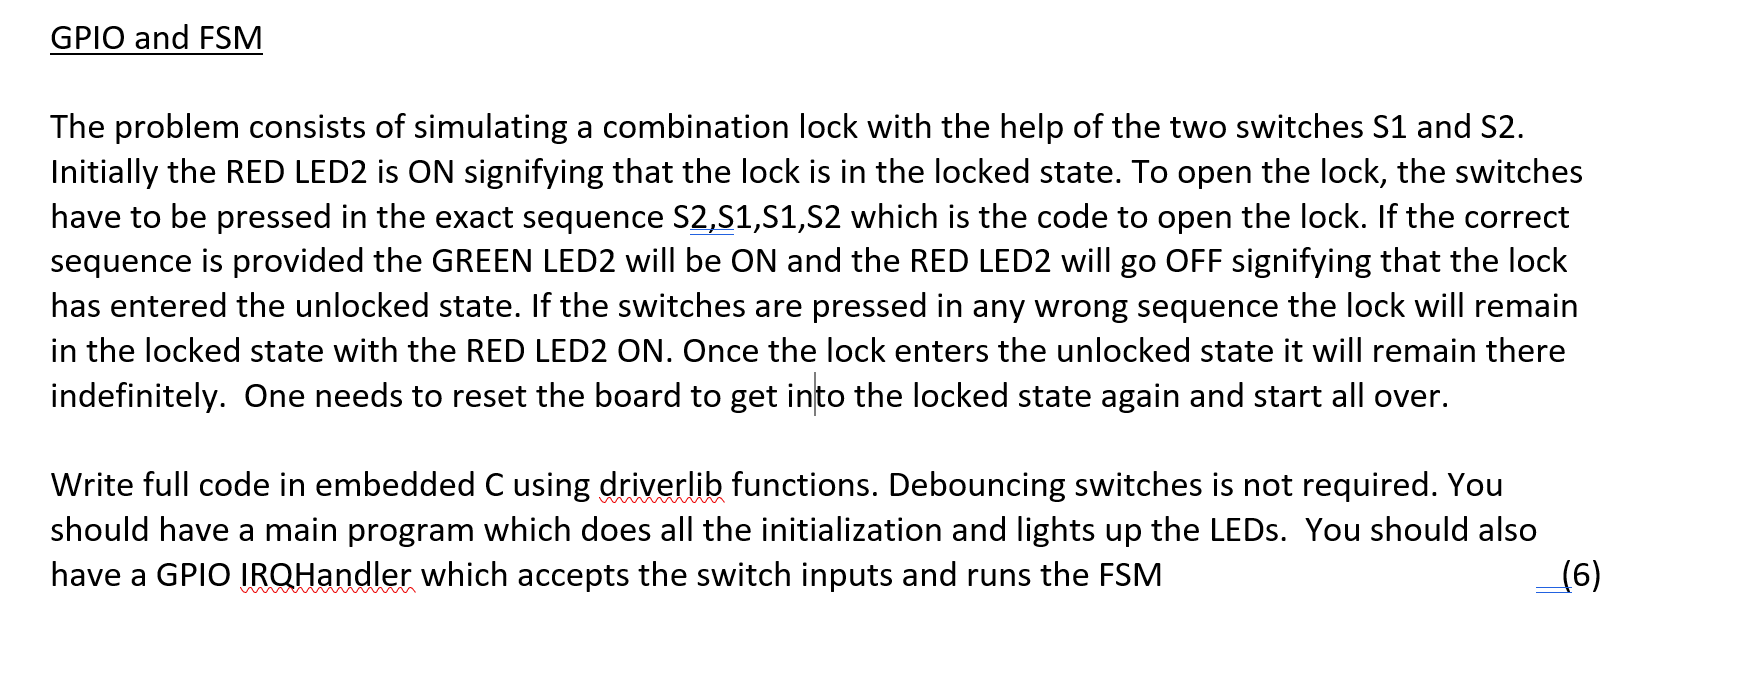 Gpio And Fsm The Problem Consists Of Simulating A Combination Lock With The Help Of The Two Switches S1 And S2 Initiall 1